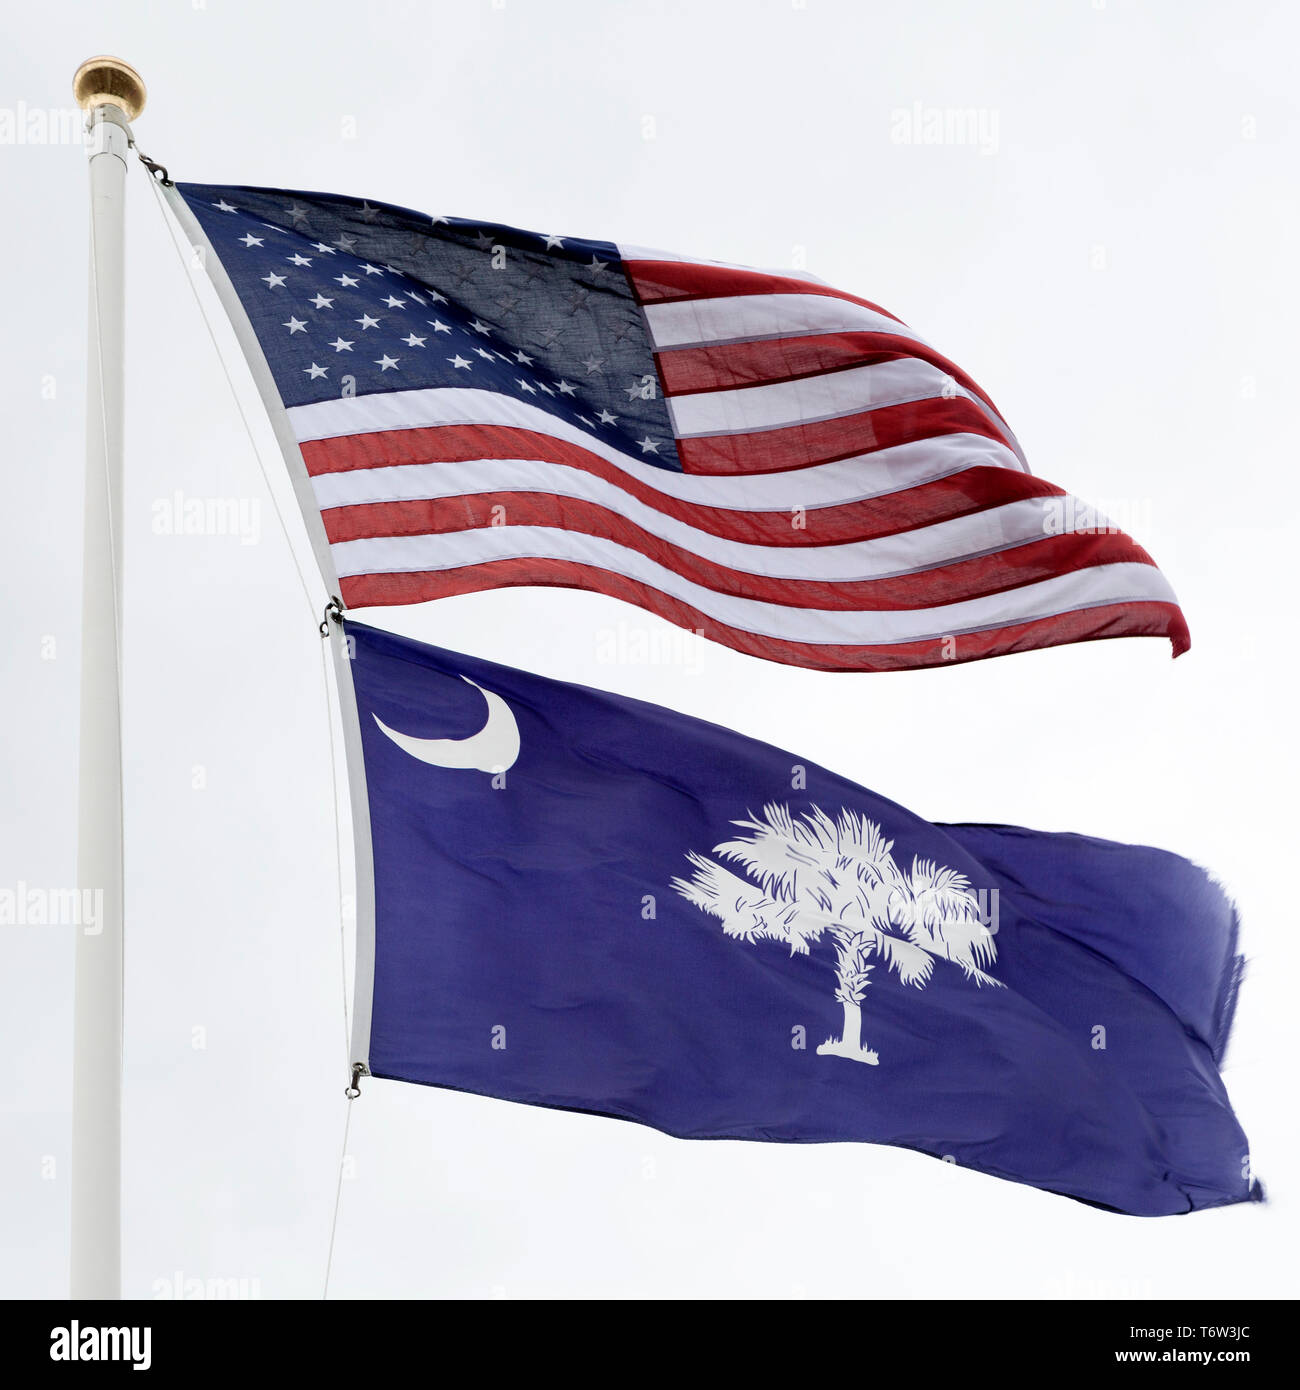 The flags of the United States of America and South Carolina flying on a flagpole. Stock Photo